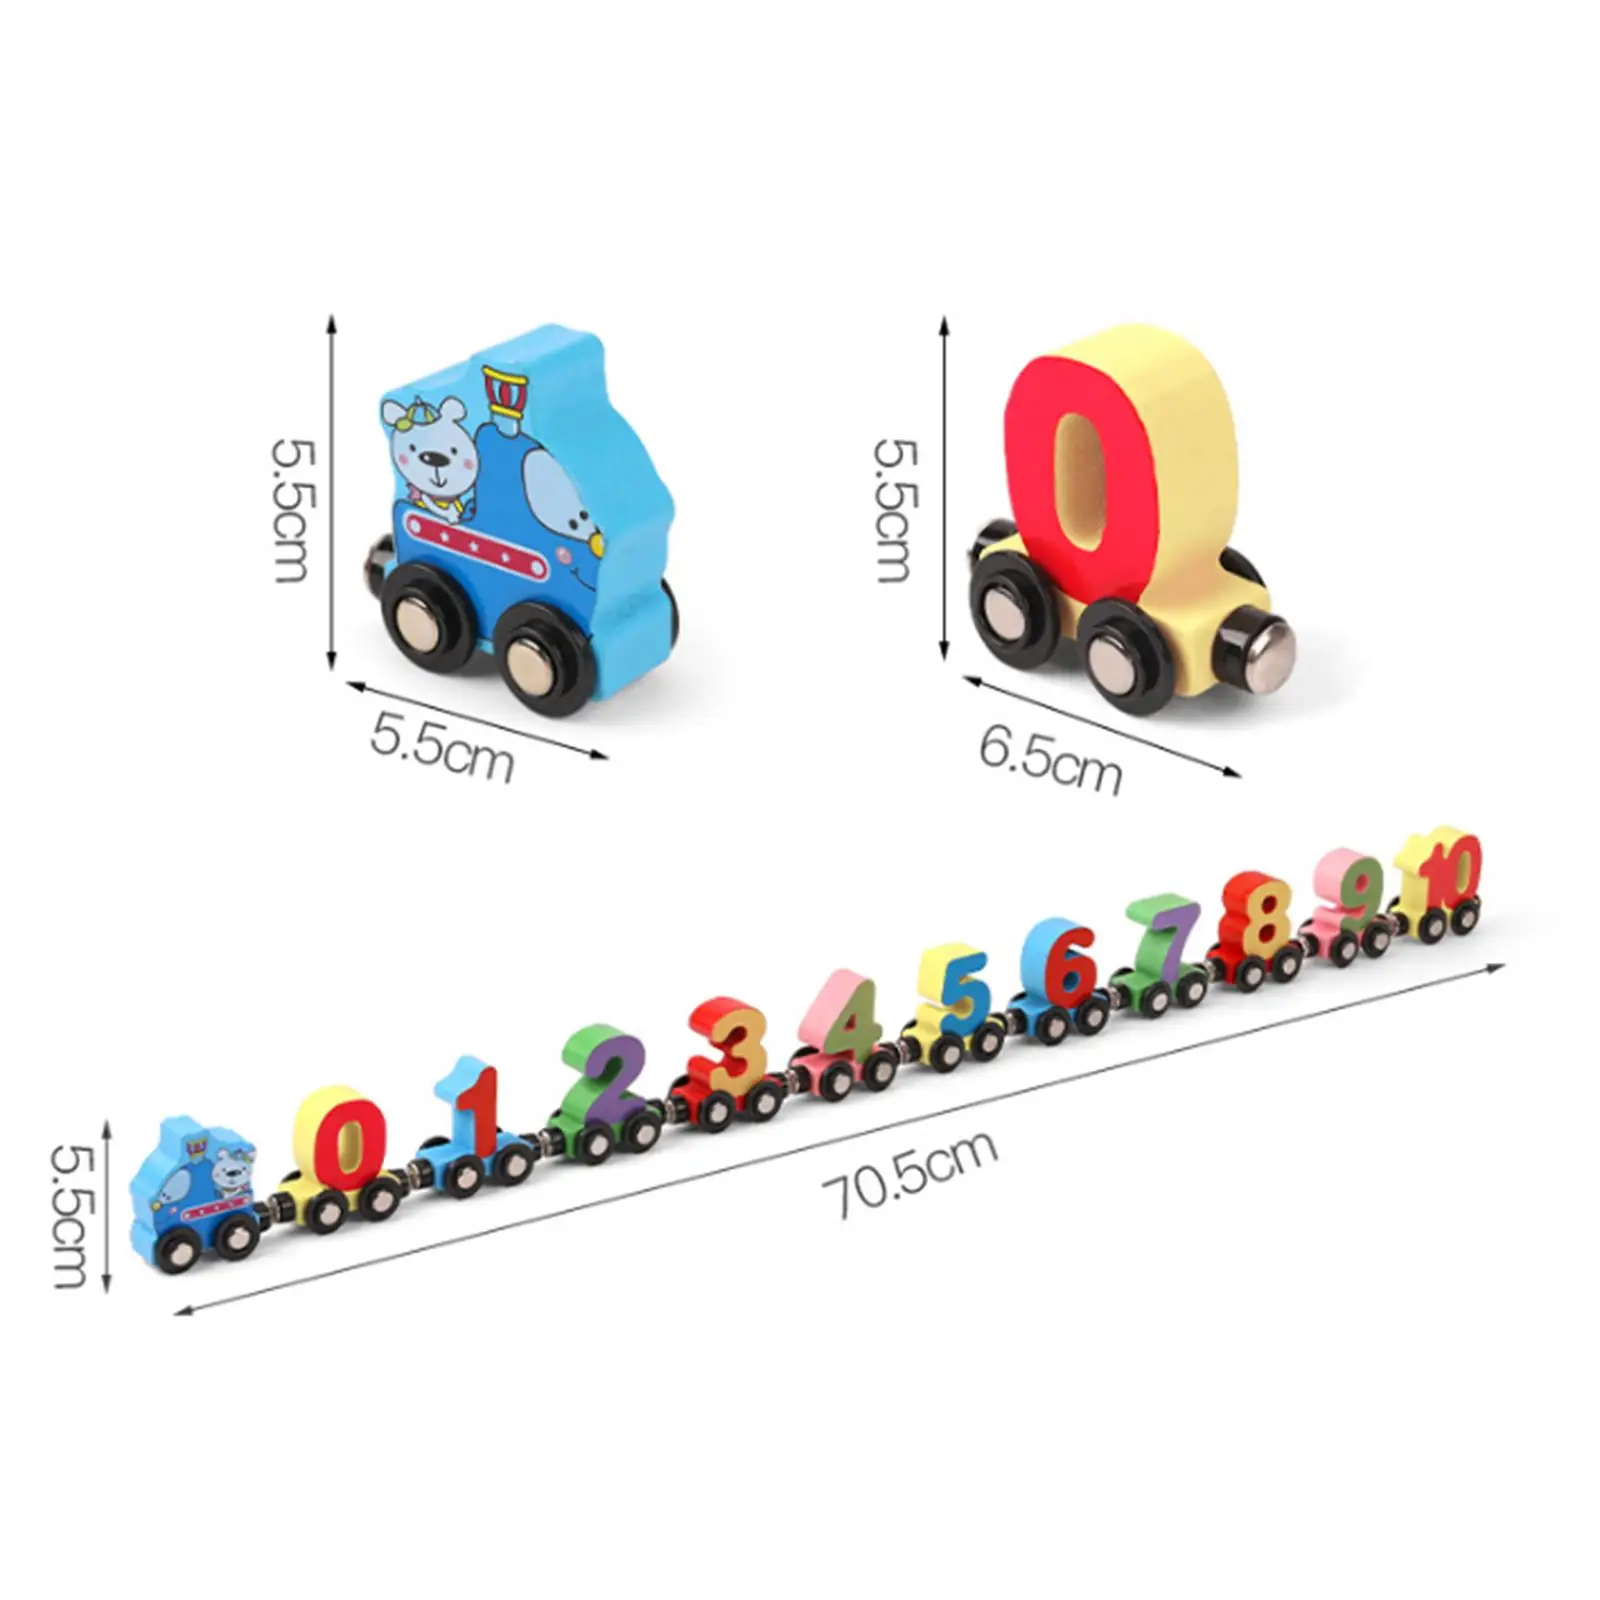 10 Pieces Building Blocks Number Train Set Educational Drag Toy Puzzle Toys Blocks Pull Along Train Toys Activity Count